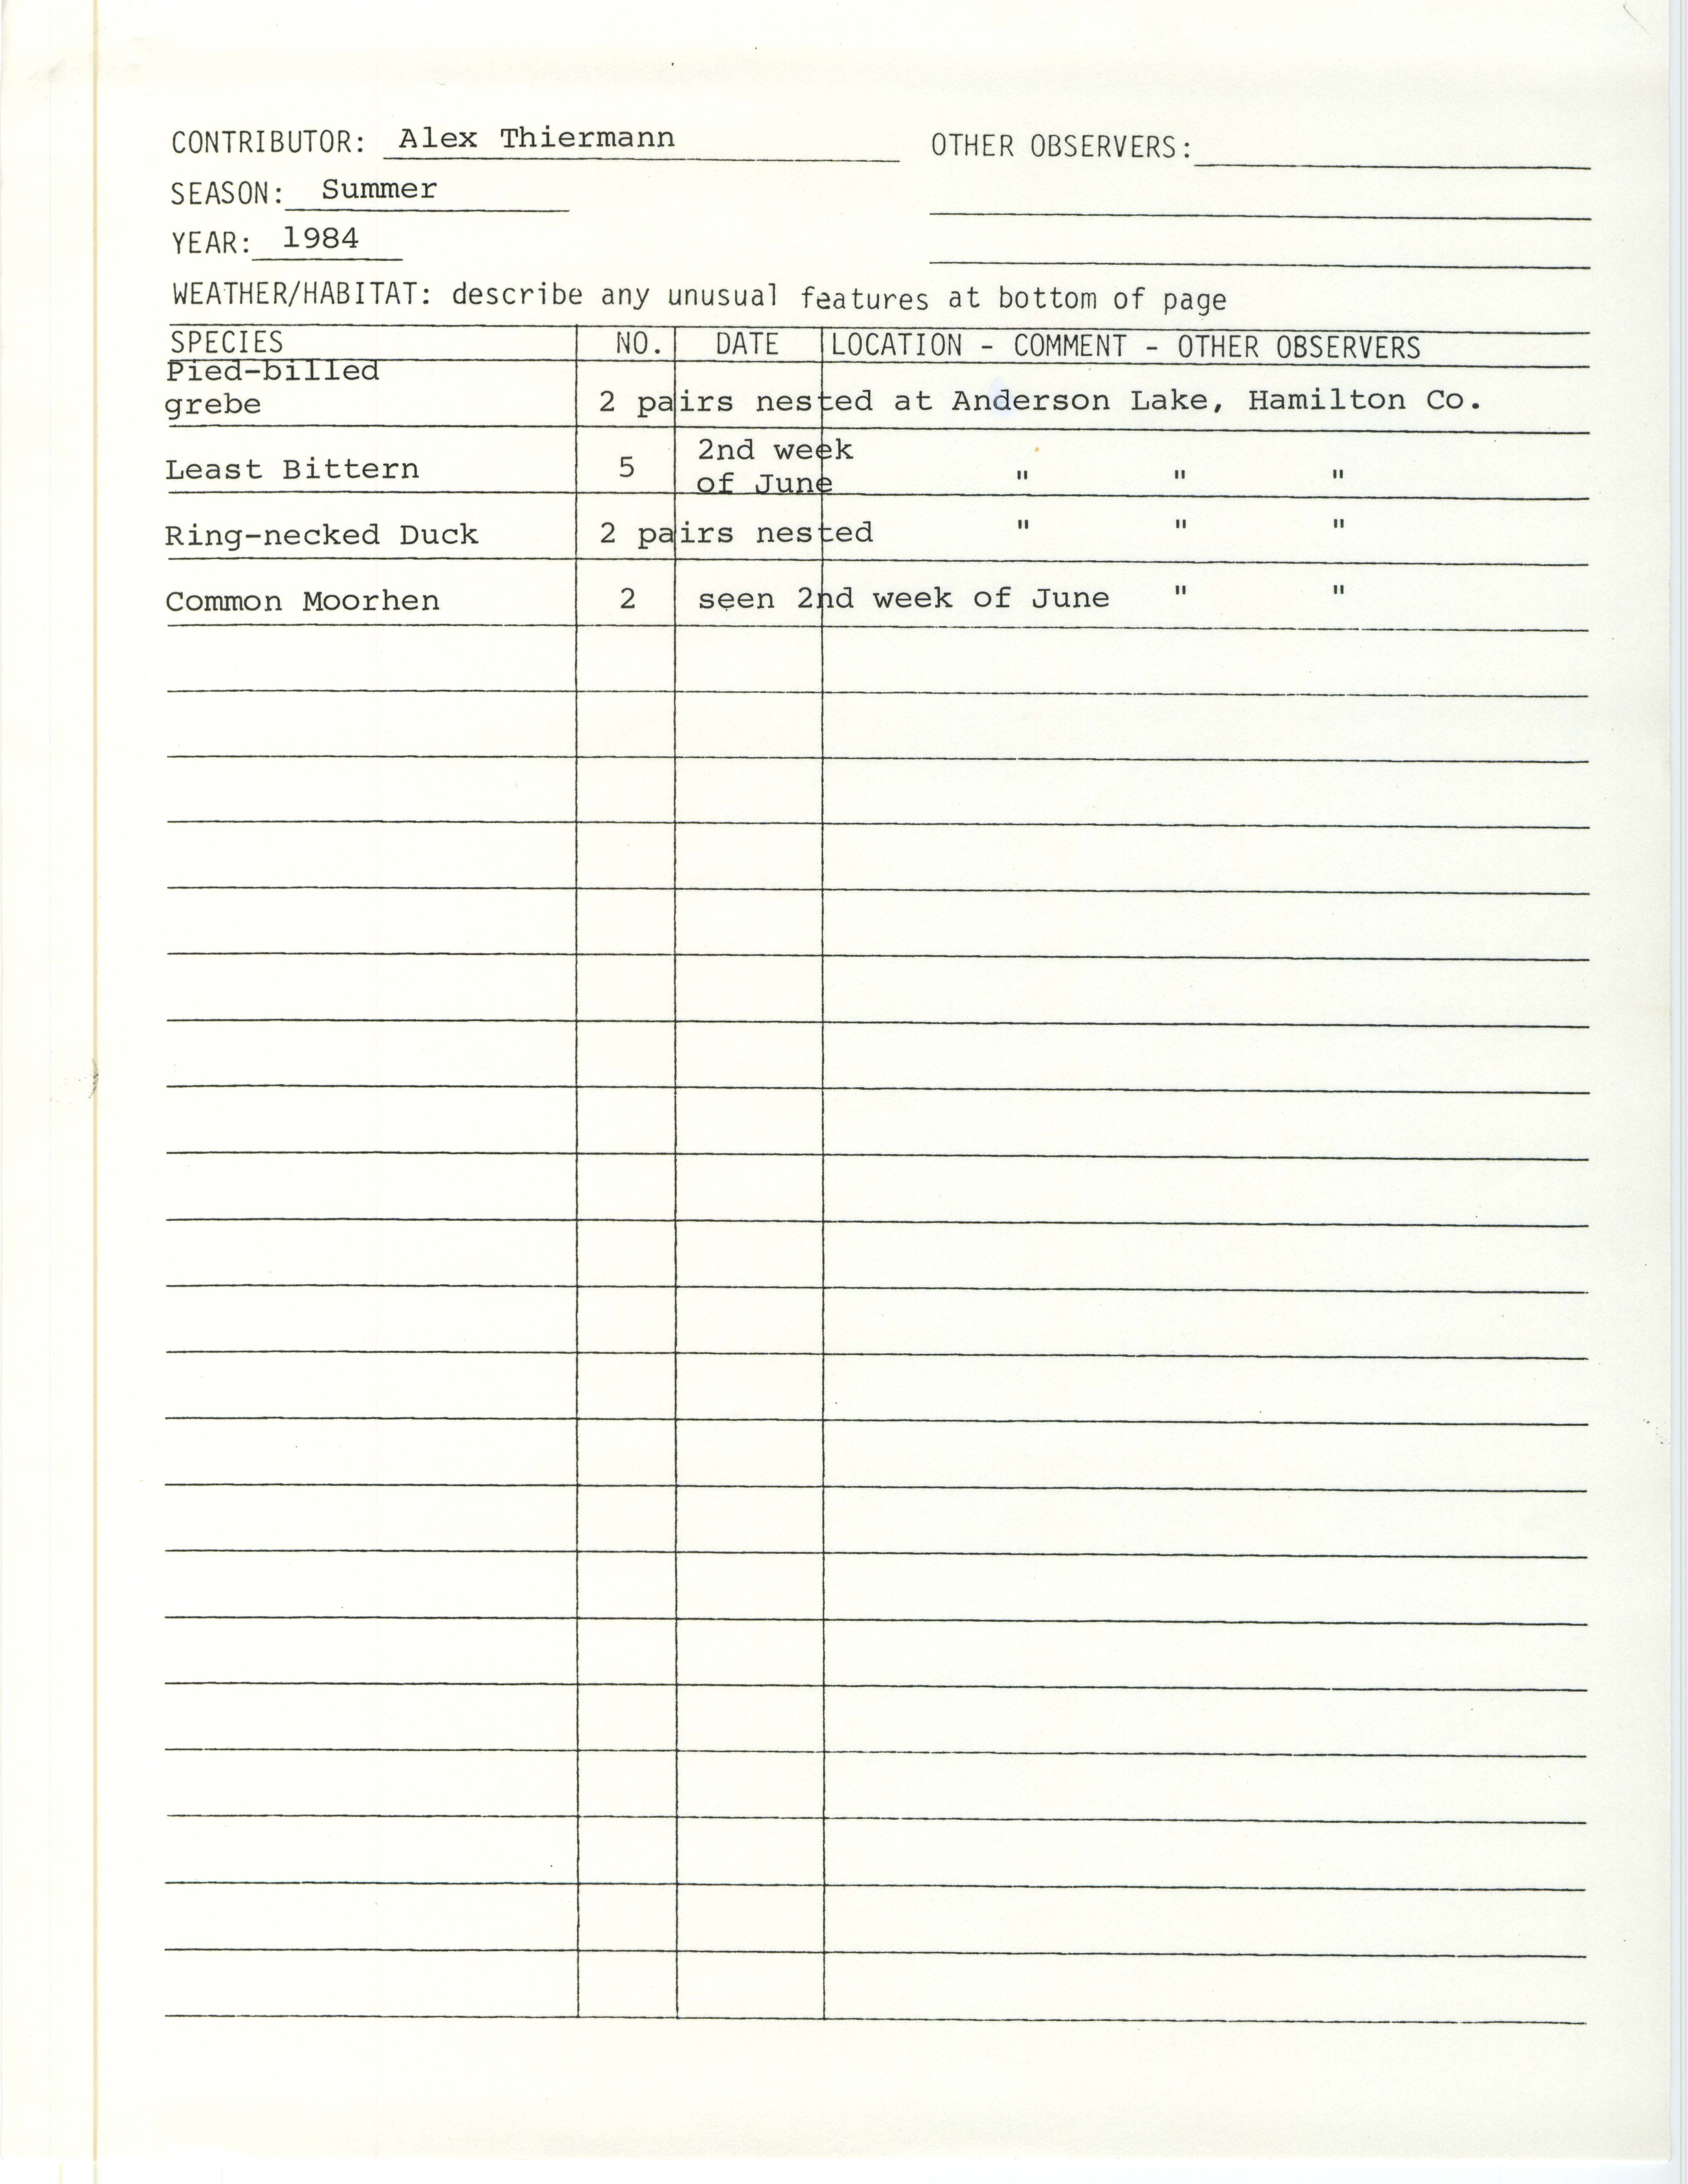 Field notes contributed by Alex Thiermann, summer 1984